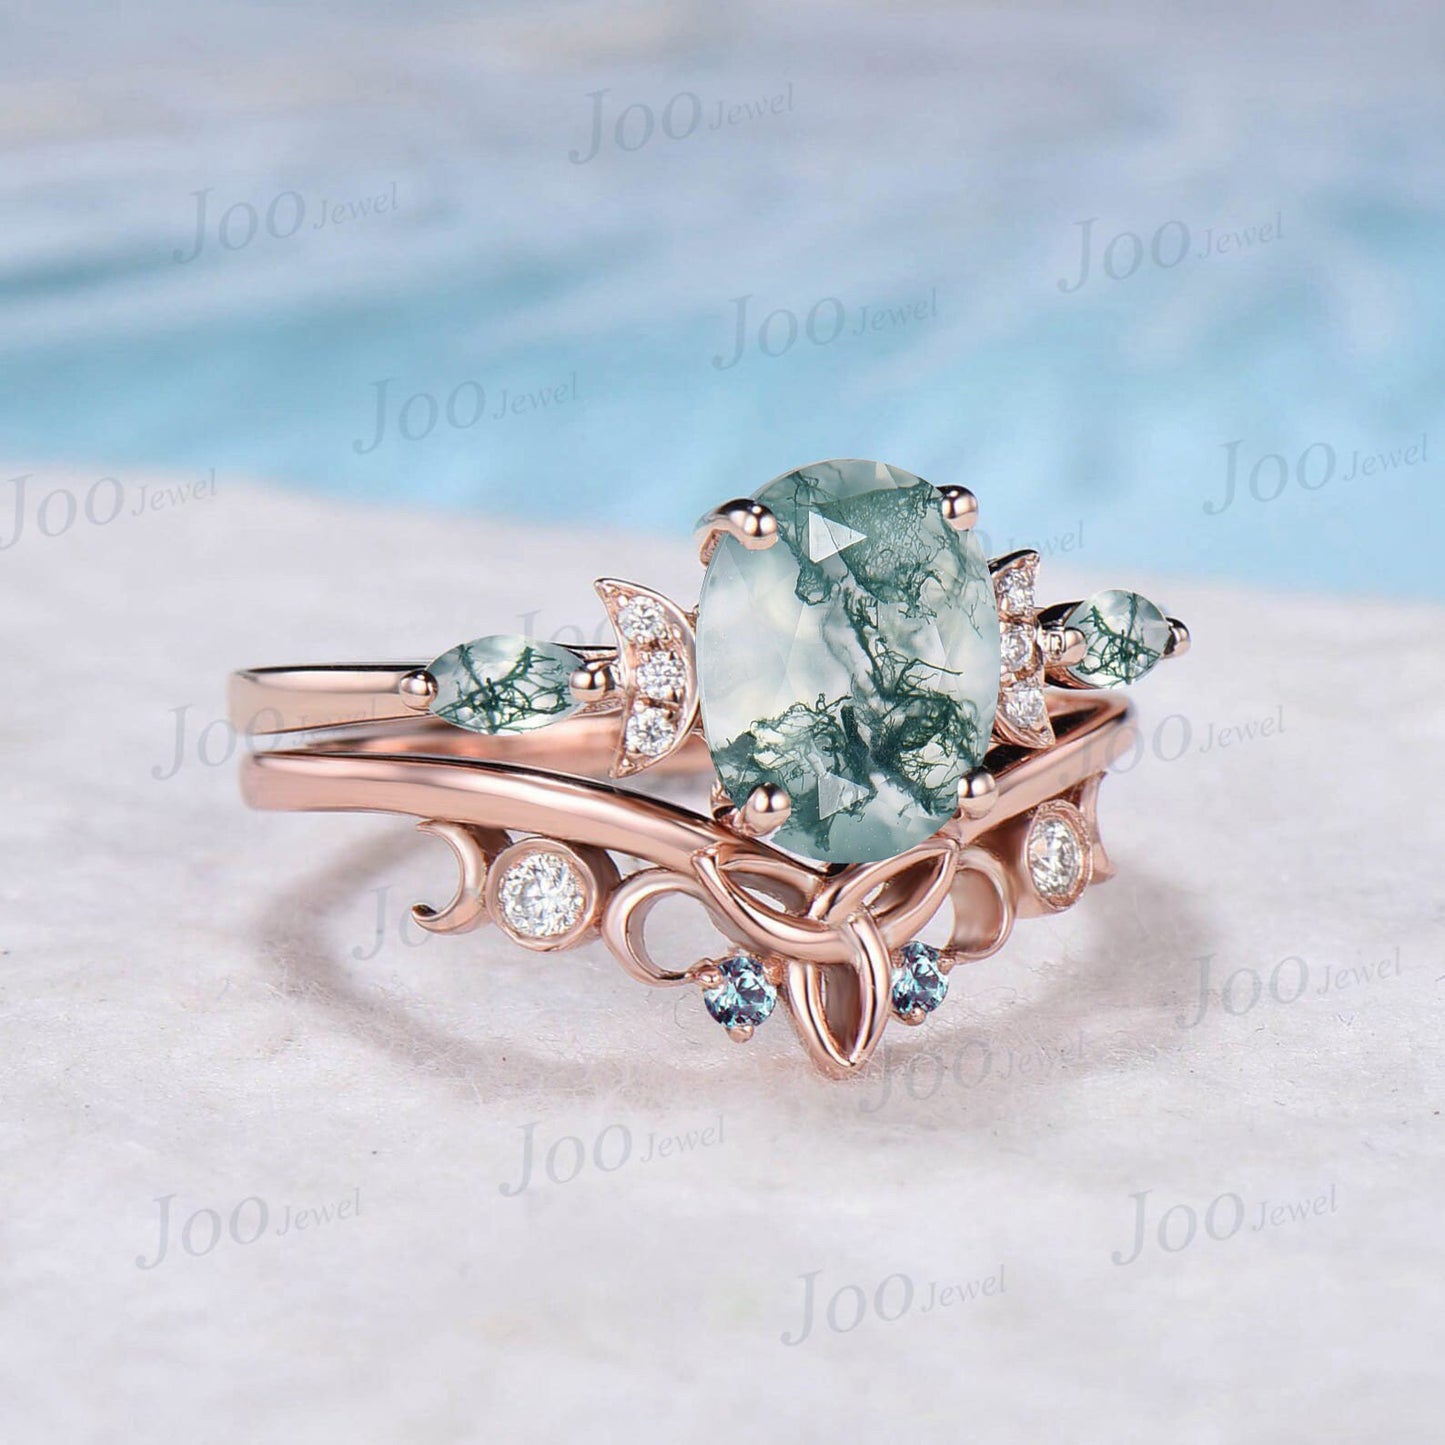 1.5ct Oval Cut Natural Moss Agate Diamond Celestial Engagement Ring Triple Moon Celtic Knot Alexandrite Band Rose Gold Moss Agate Bridal Set